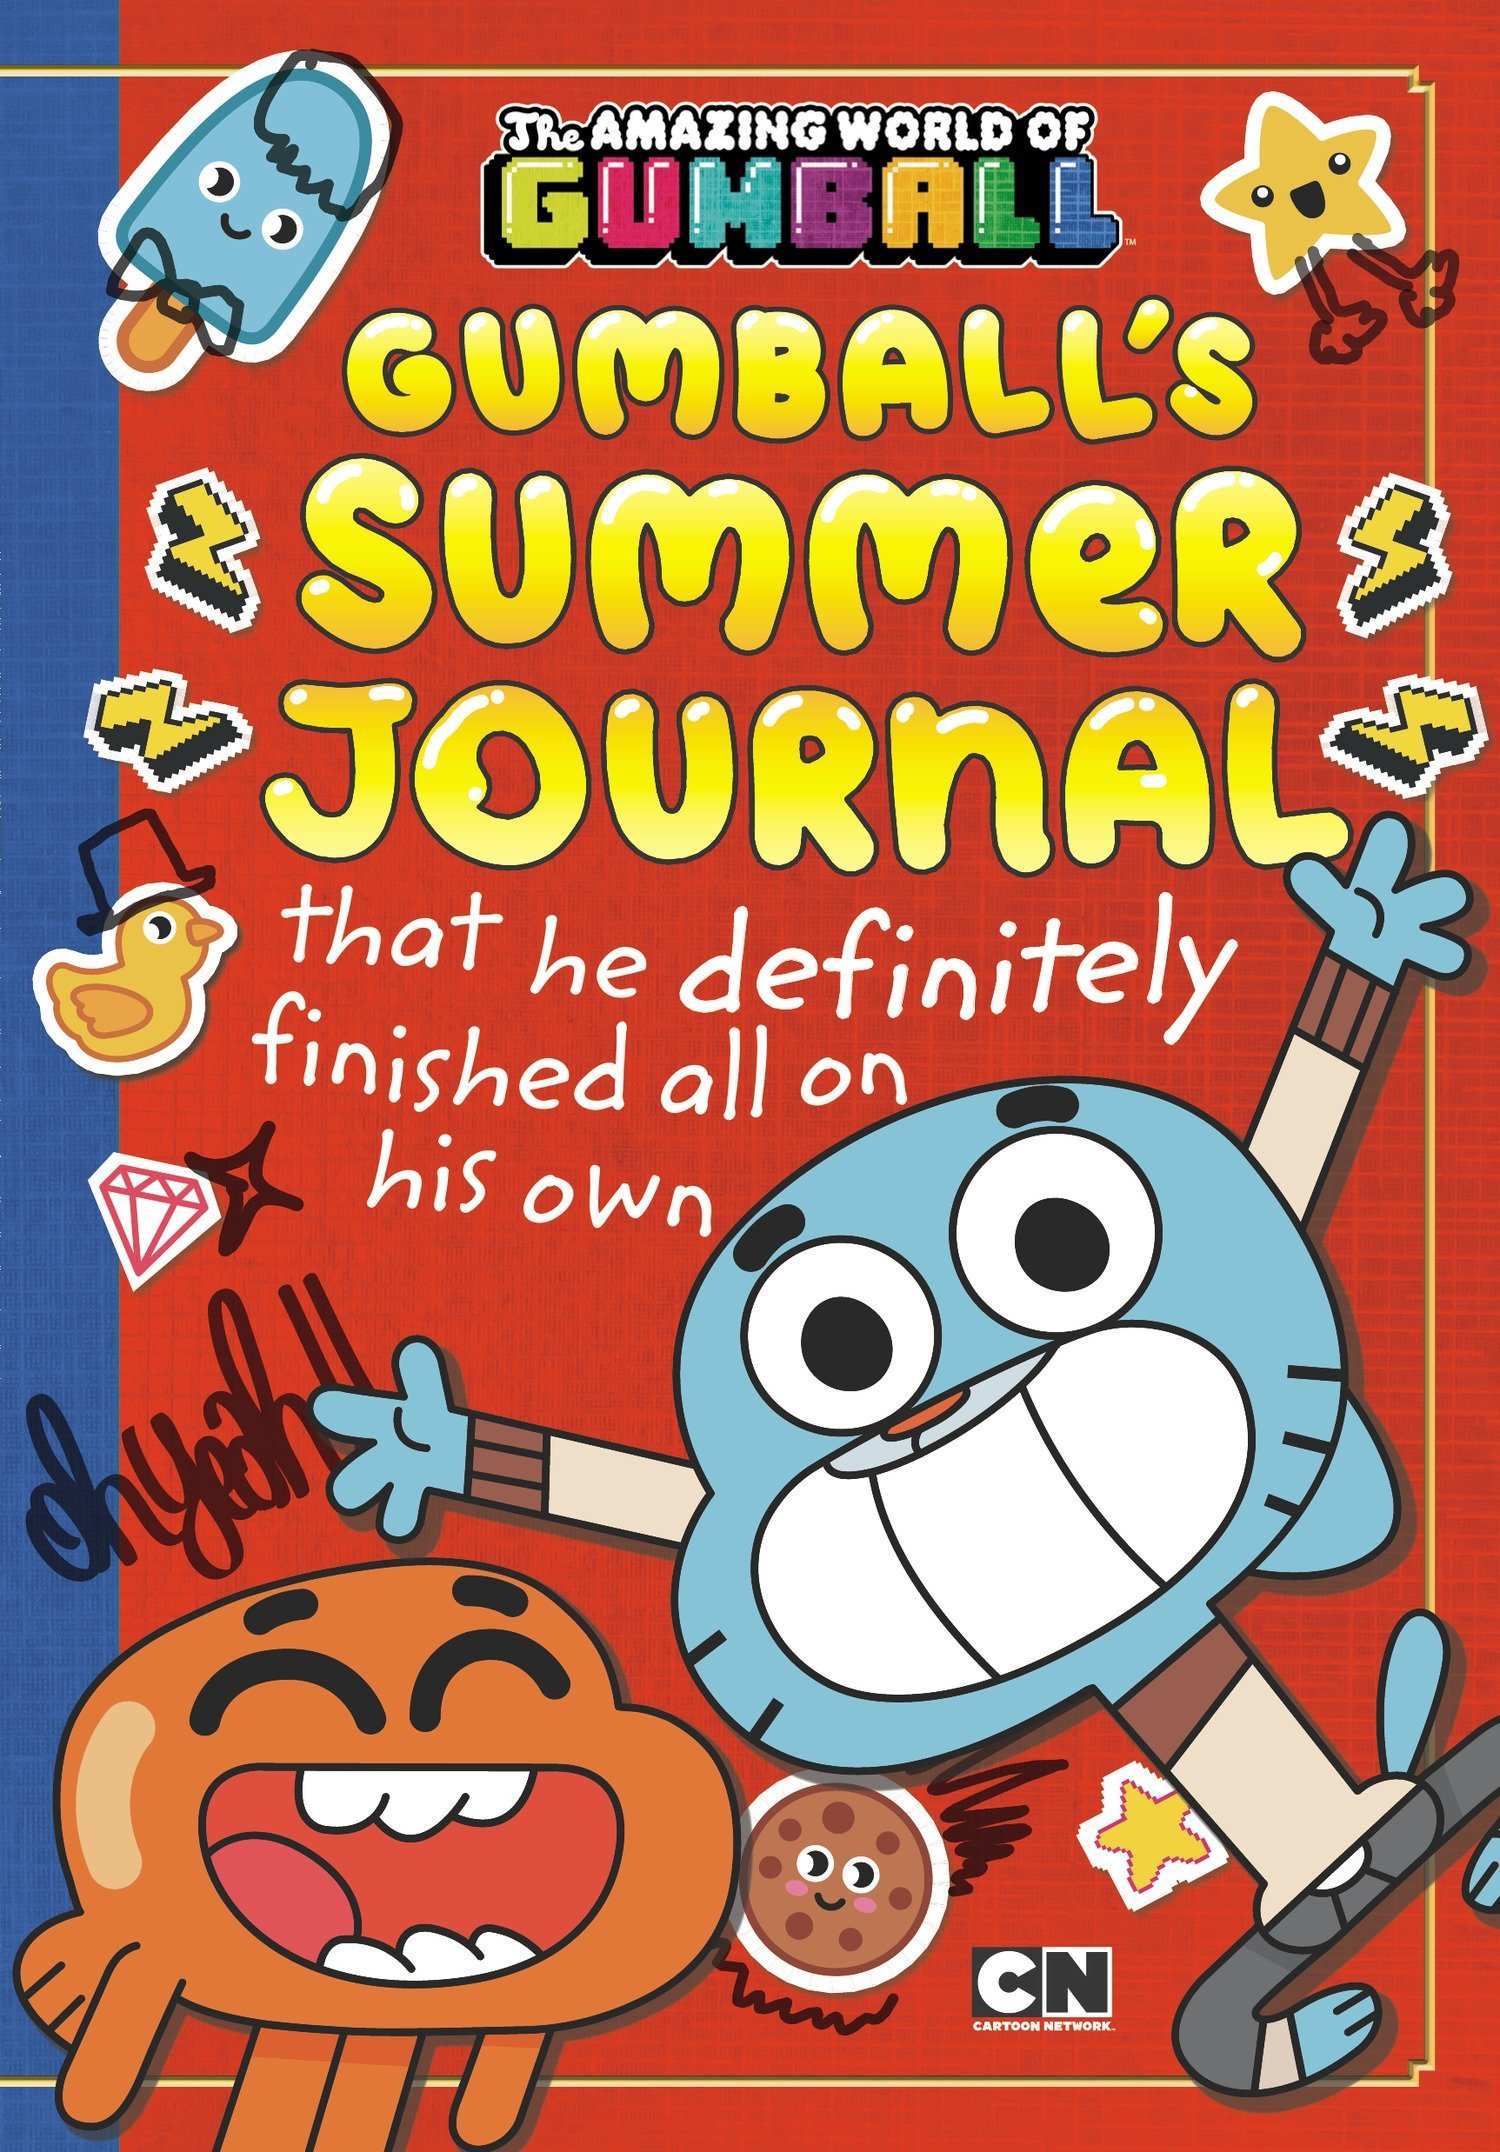 Mua Gumball's Summer Journal That He Definitely Finished All on His Own